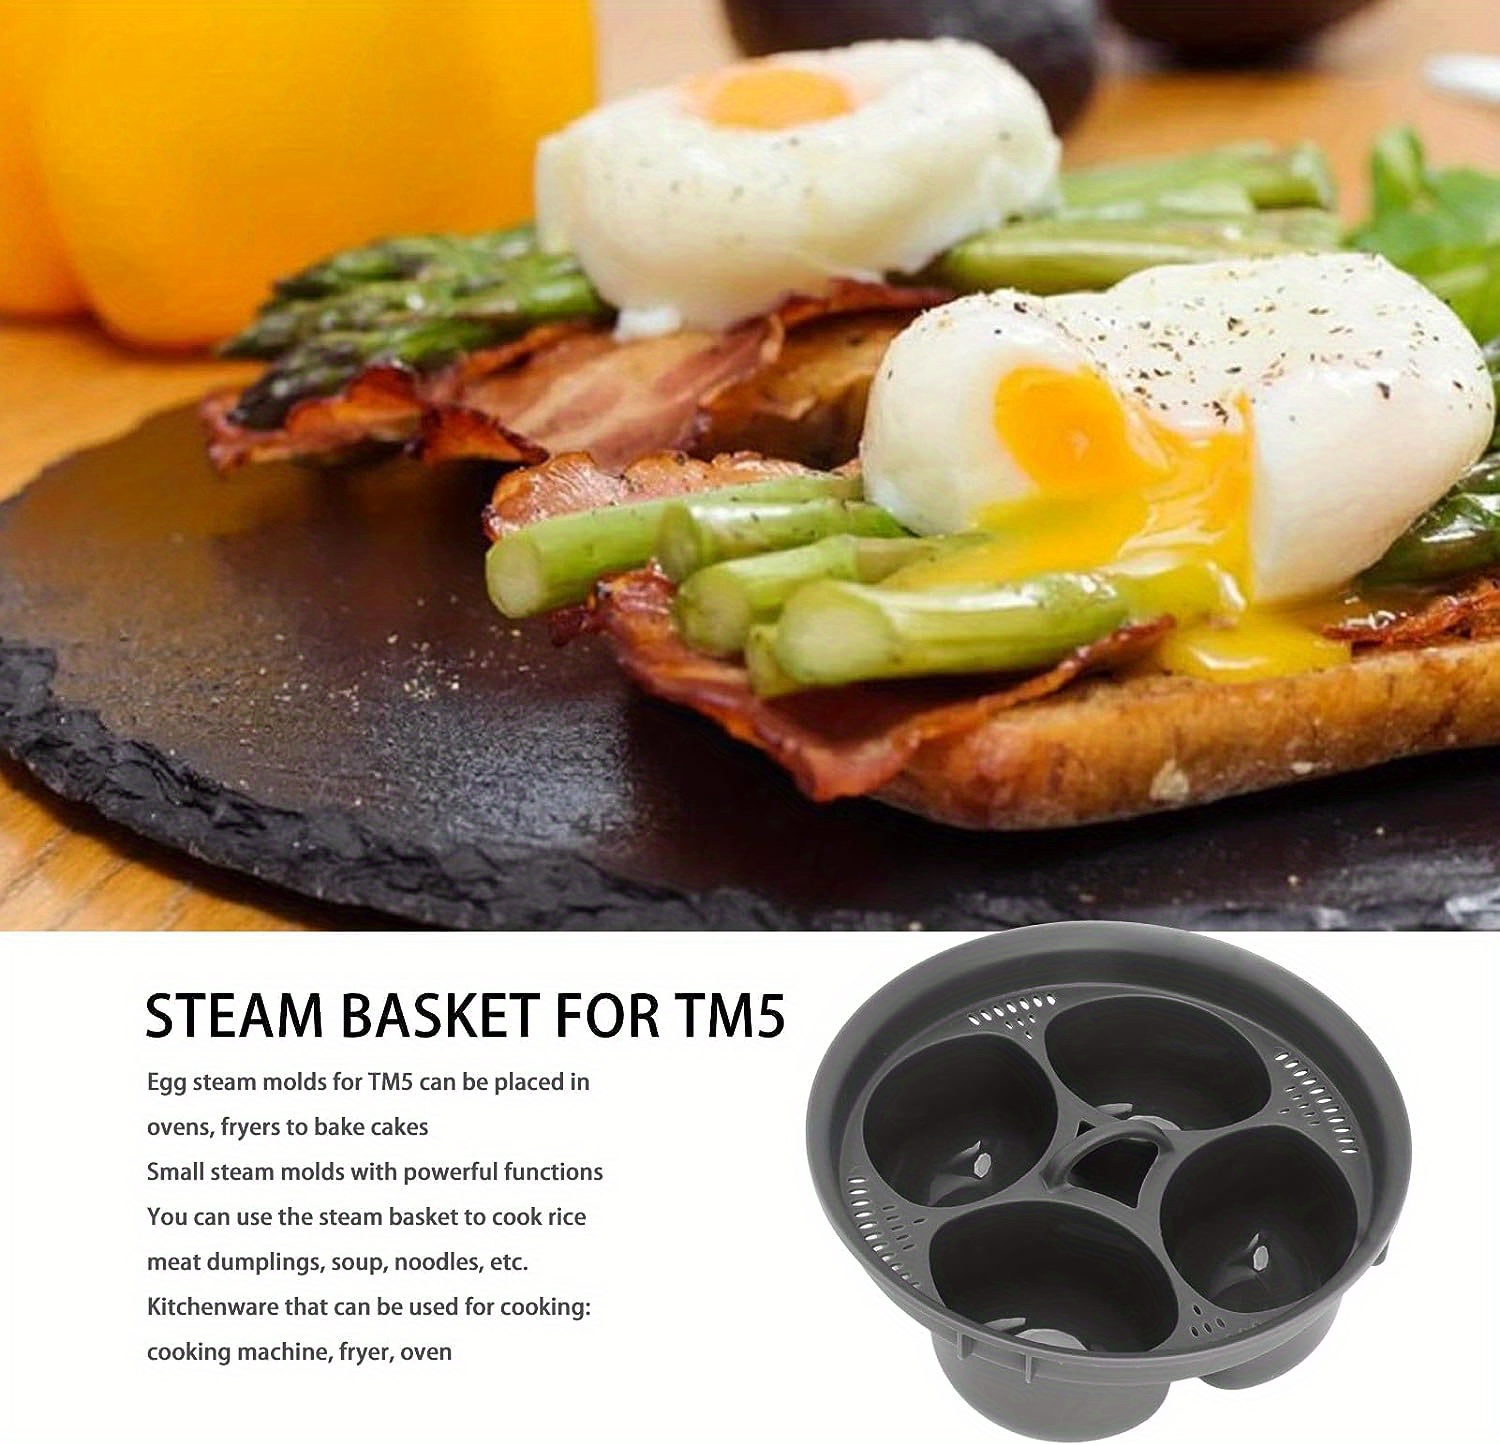 Egg Poacher Pan - Stainless Steel Poached Egg Cooker – Perfect Poached Egg Maker